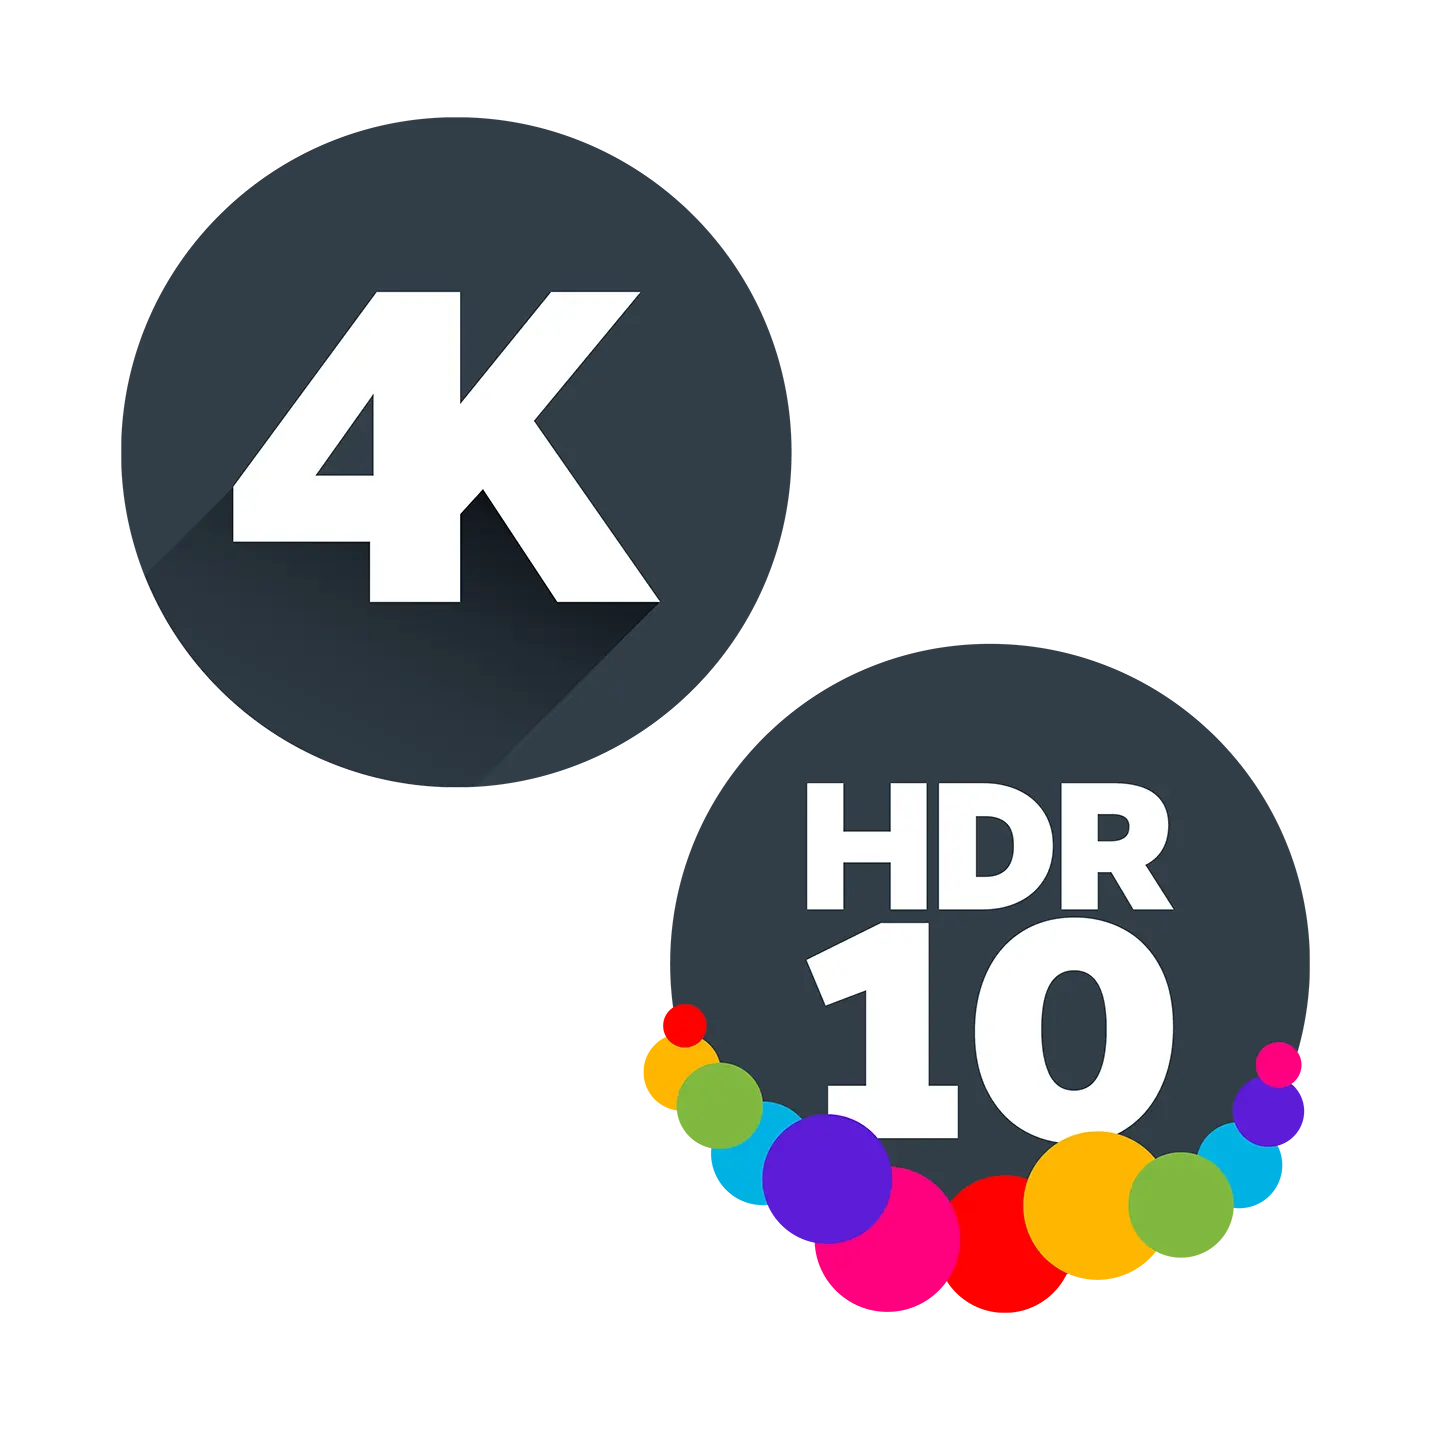 4k and HDR10 technologies